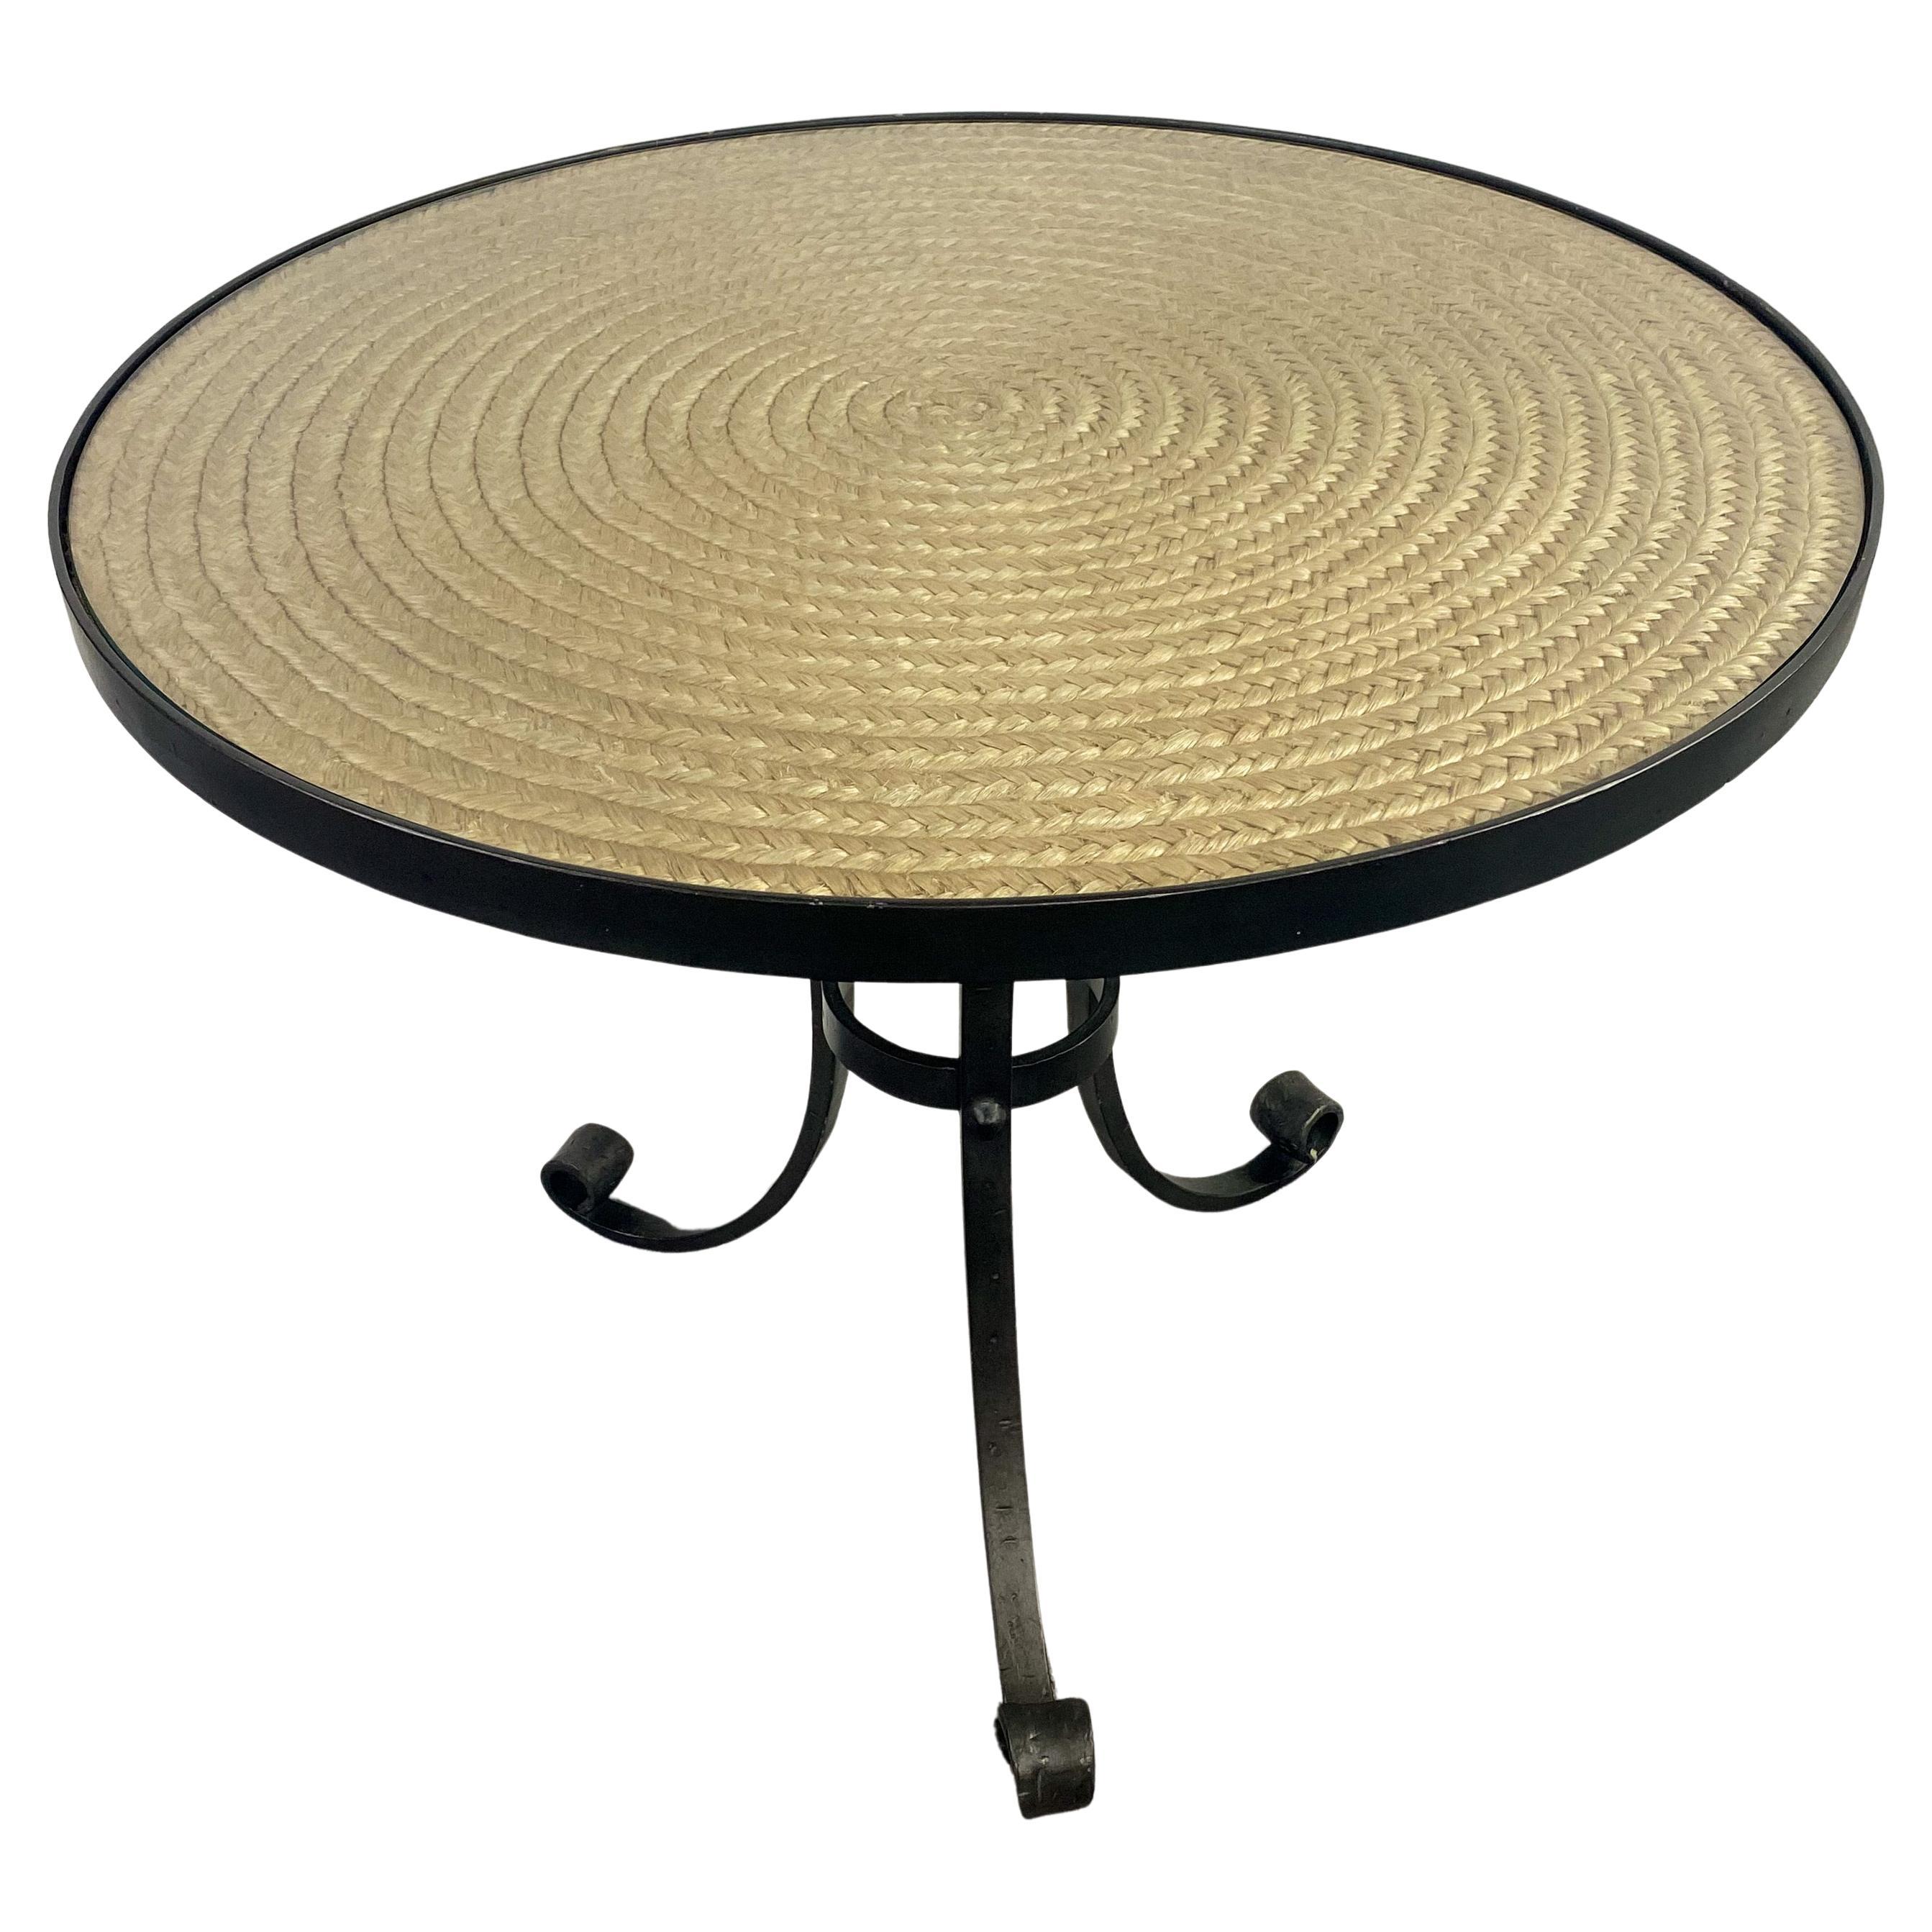 Ralph Lauren Wrought Iron "Sheltering Sky" Round Indoor or Outdoor Table For Sale